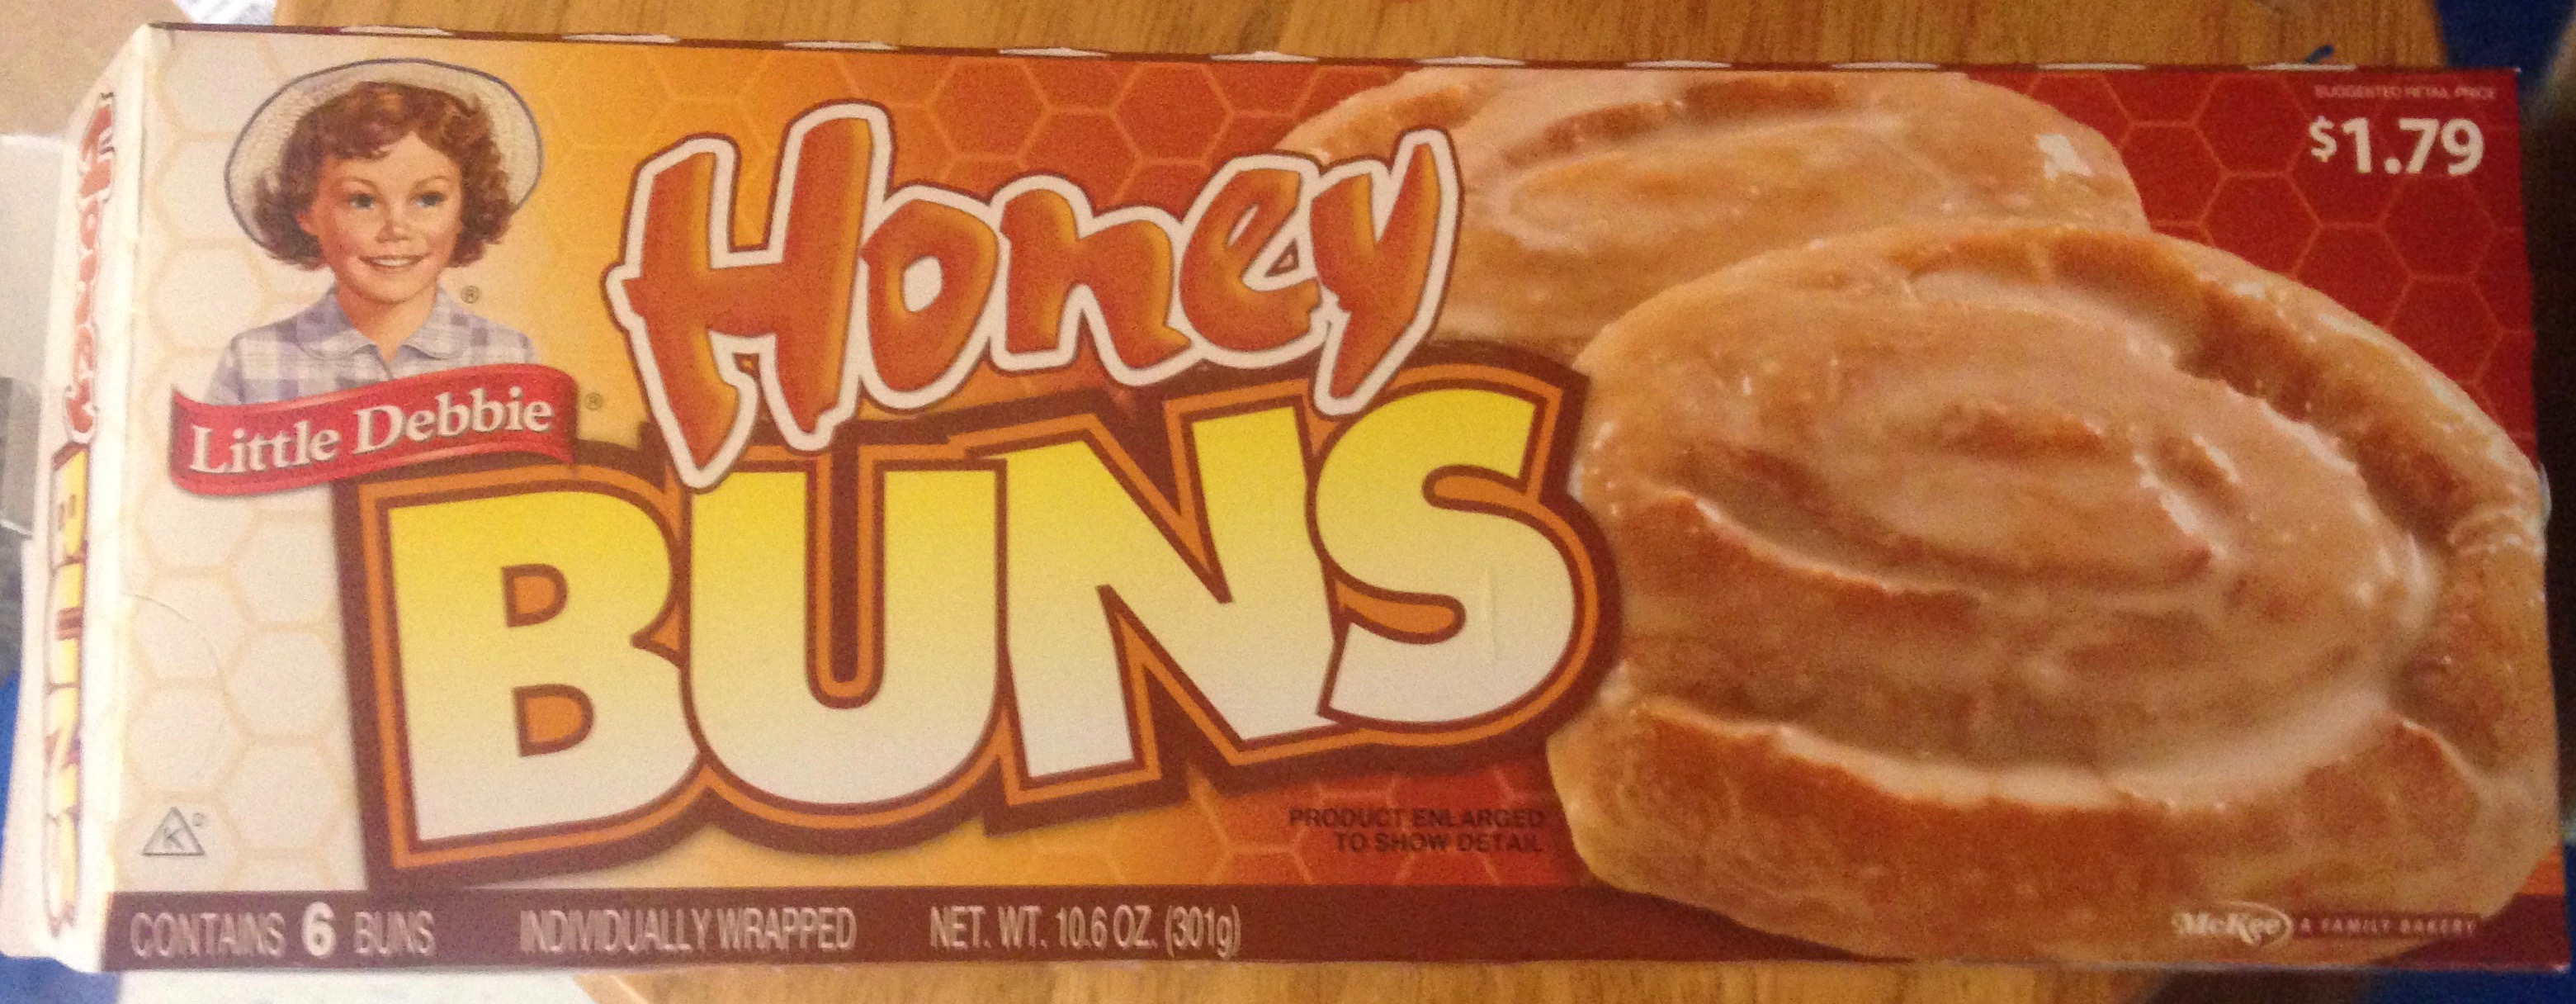 Little Debbie Honey Buns, Individually Wrapped Breakfast Pastries